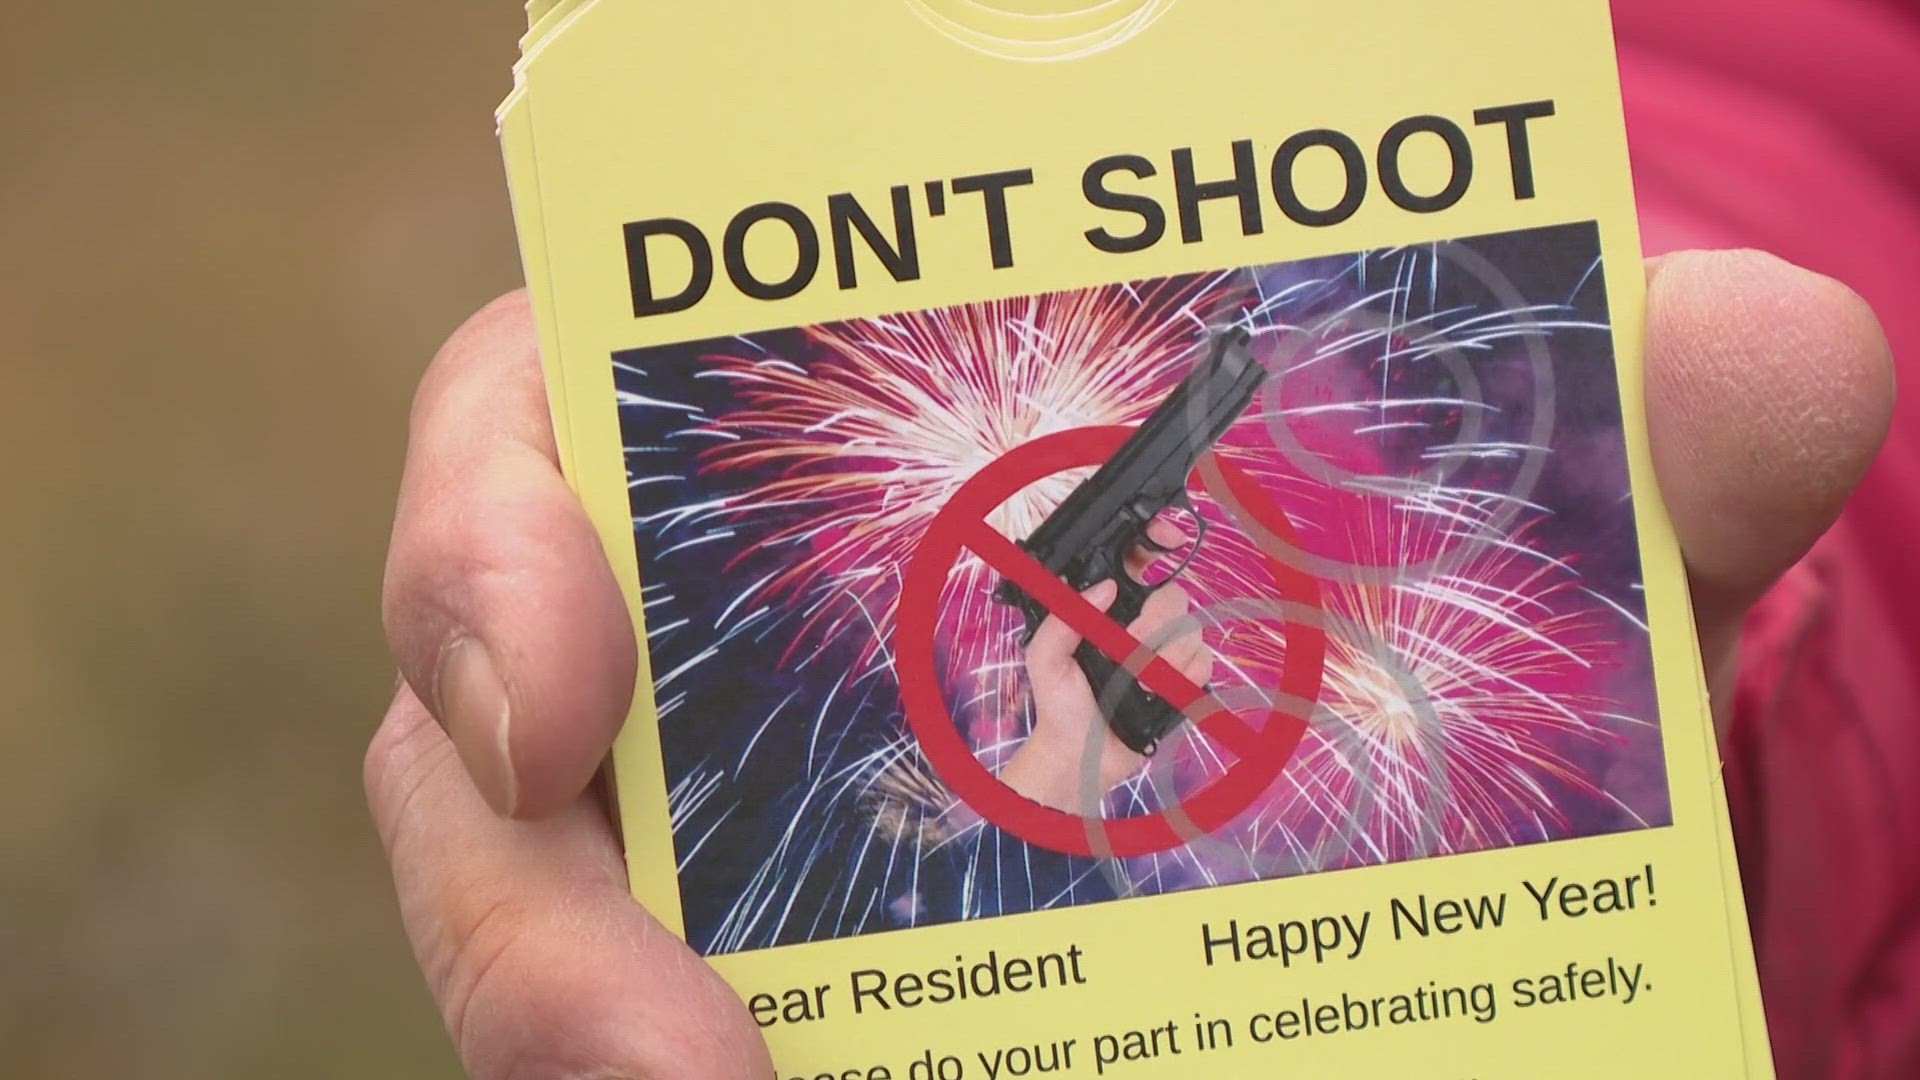 "We don't need any gunfire on New Year's Eve. It's simply not safe," Lane Forman with the Tower Grove Neighborhood Association said.